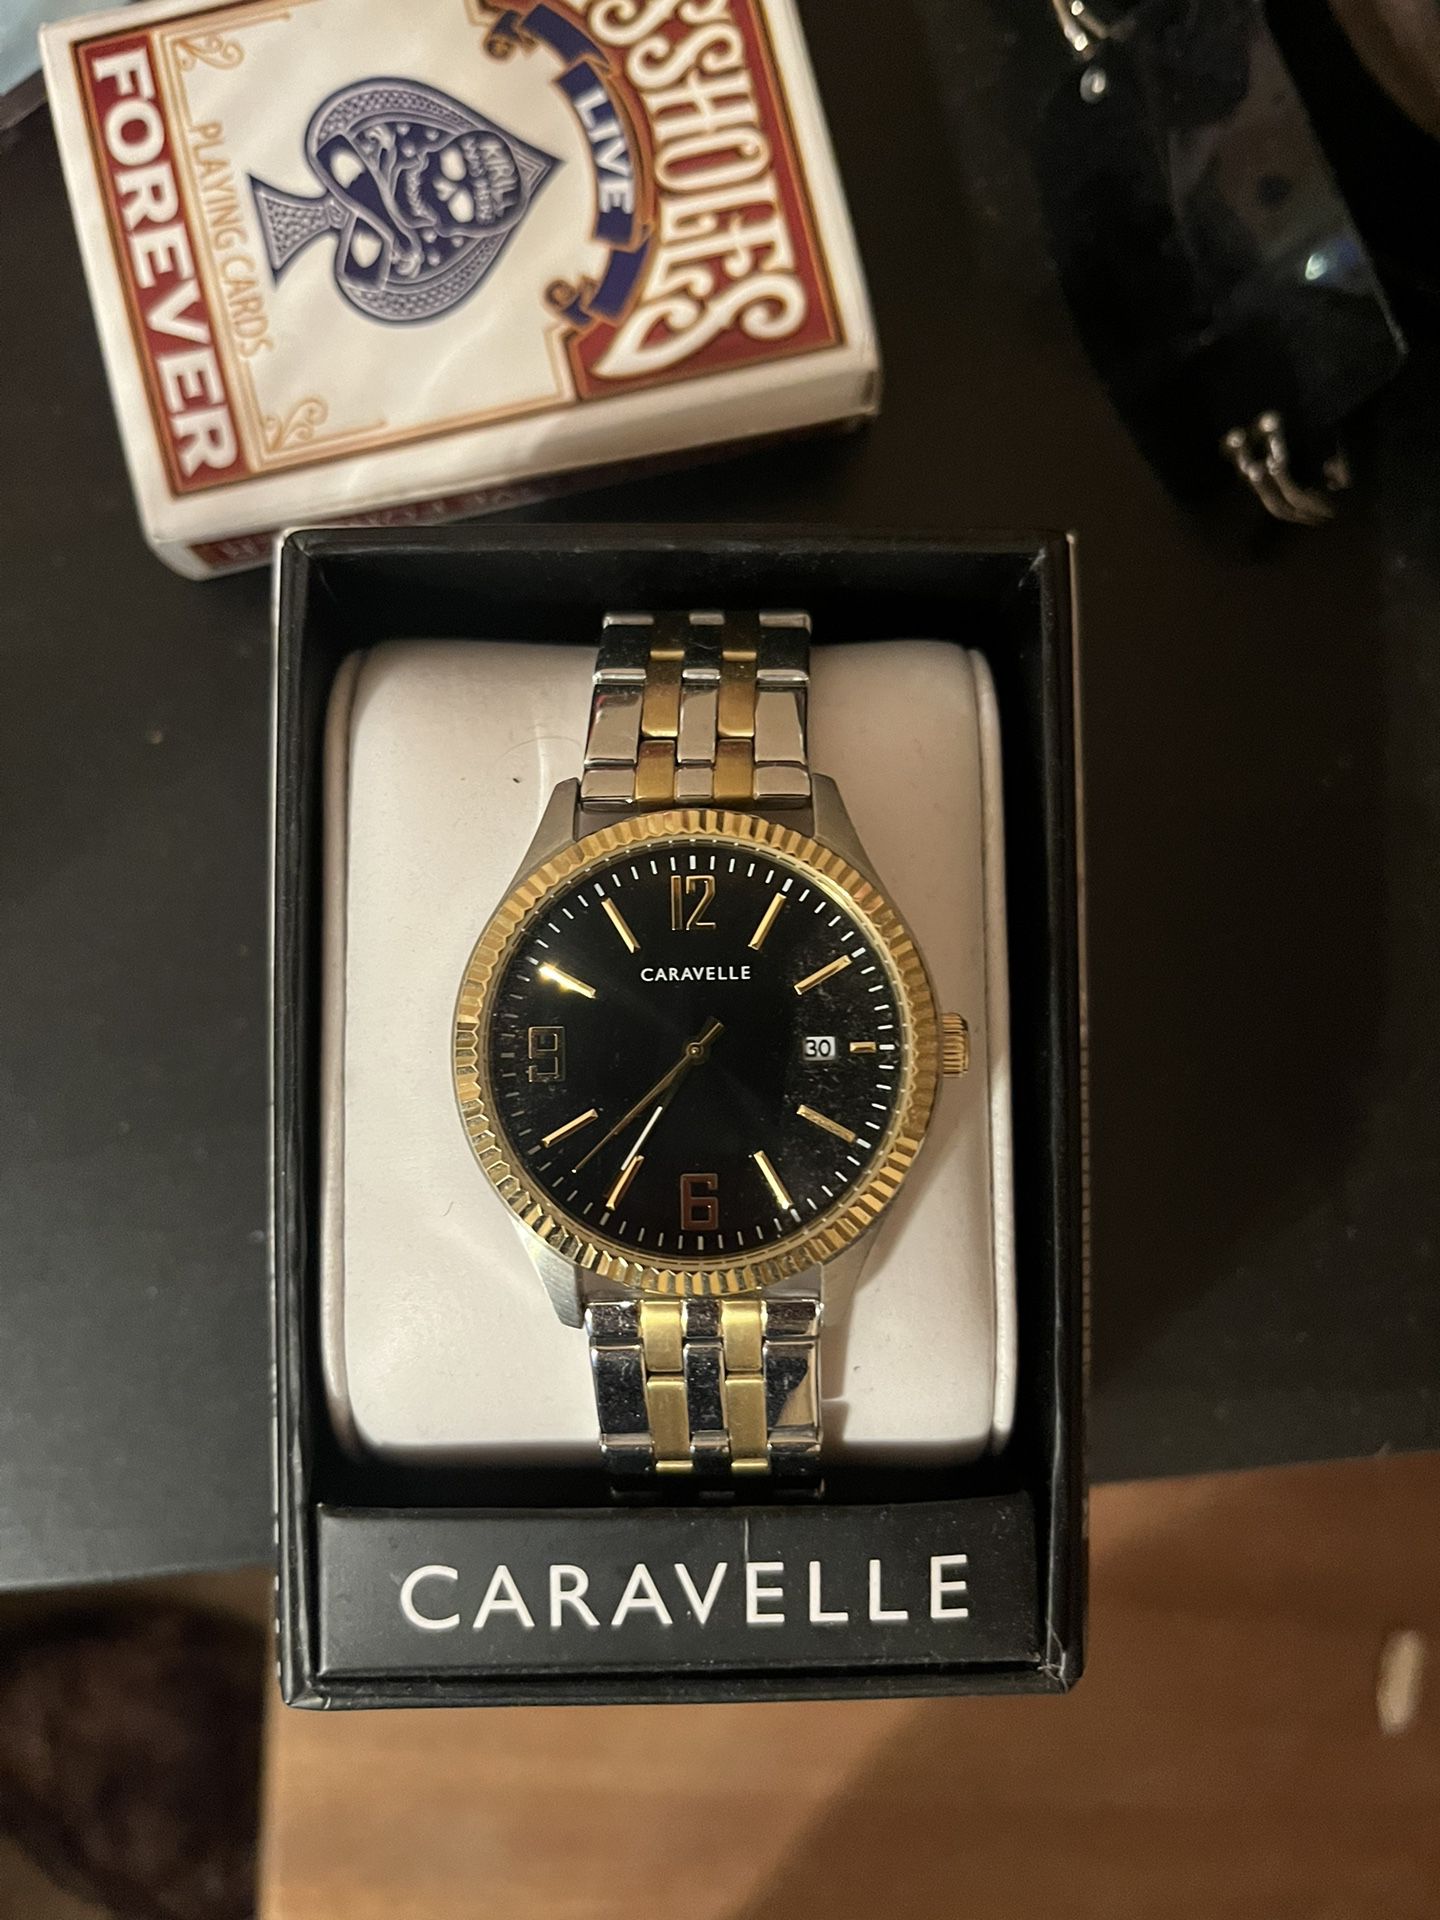 Caravelle Watch